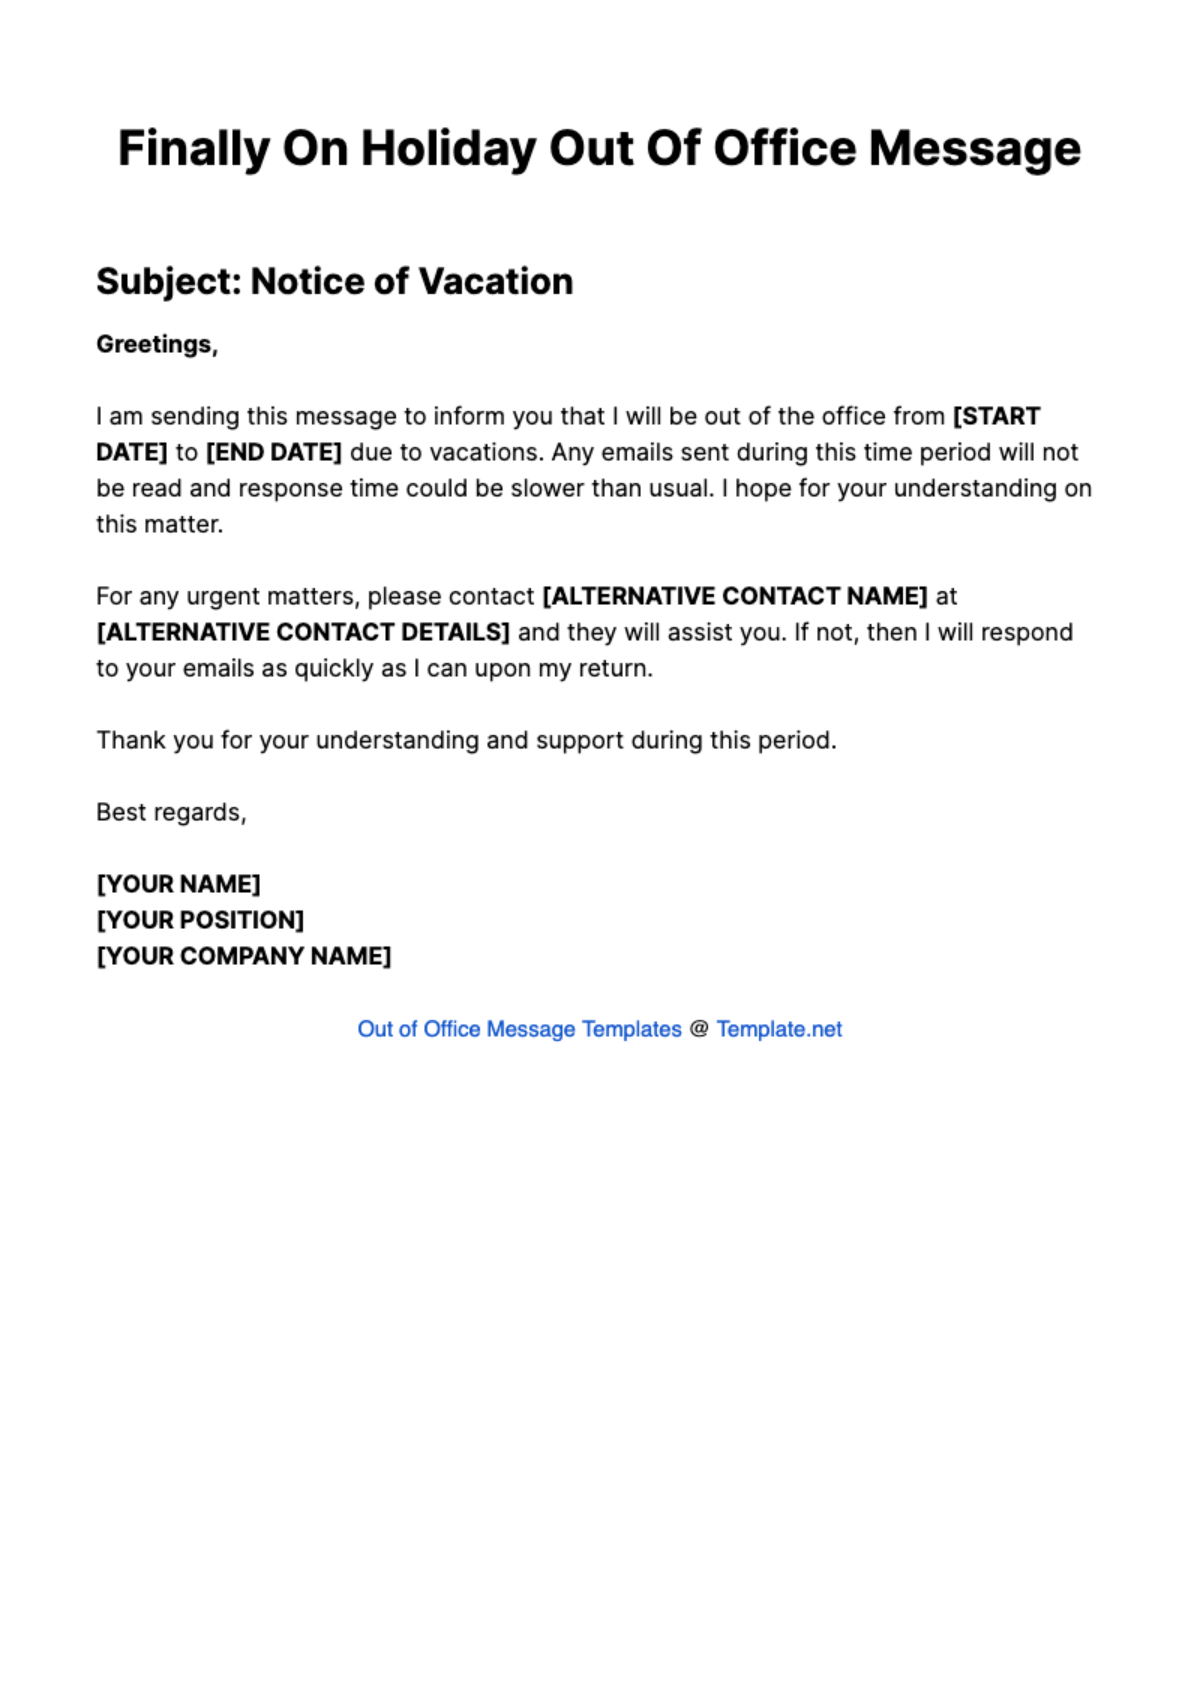 Finally On Holiday Out Of Office Message Template